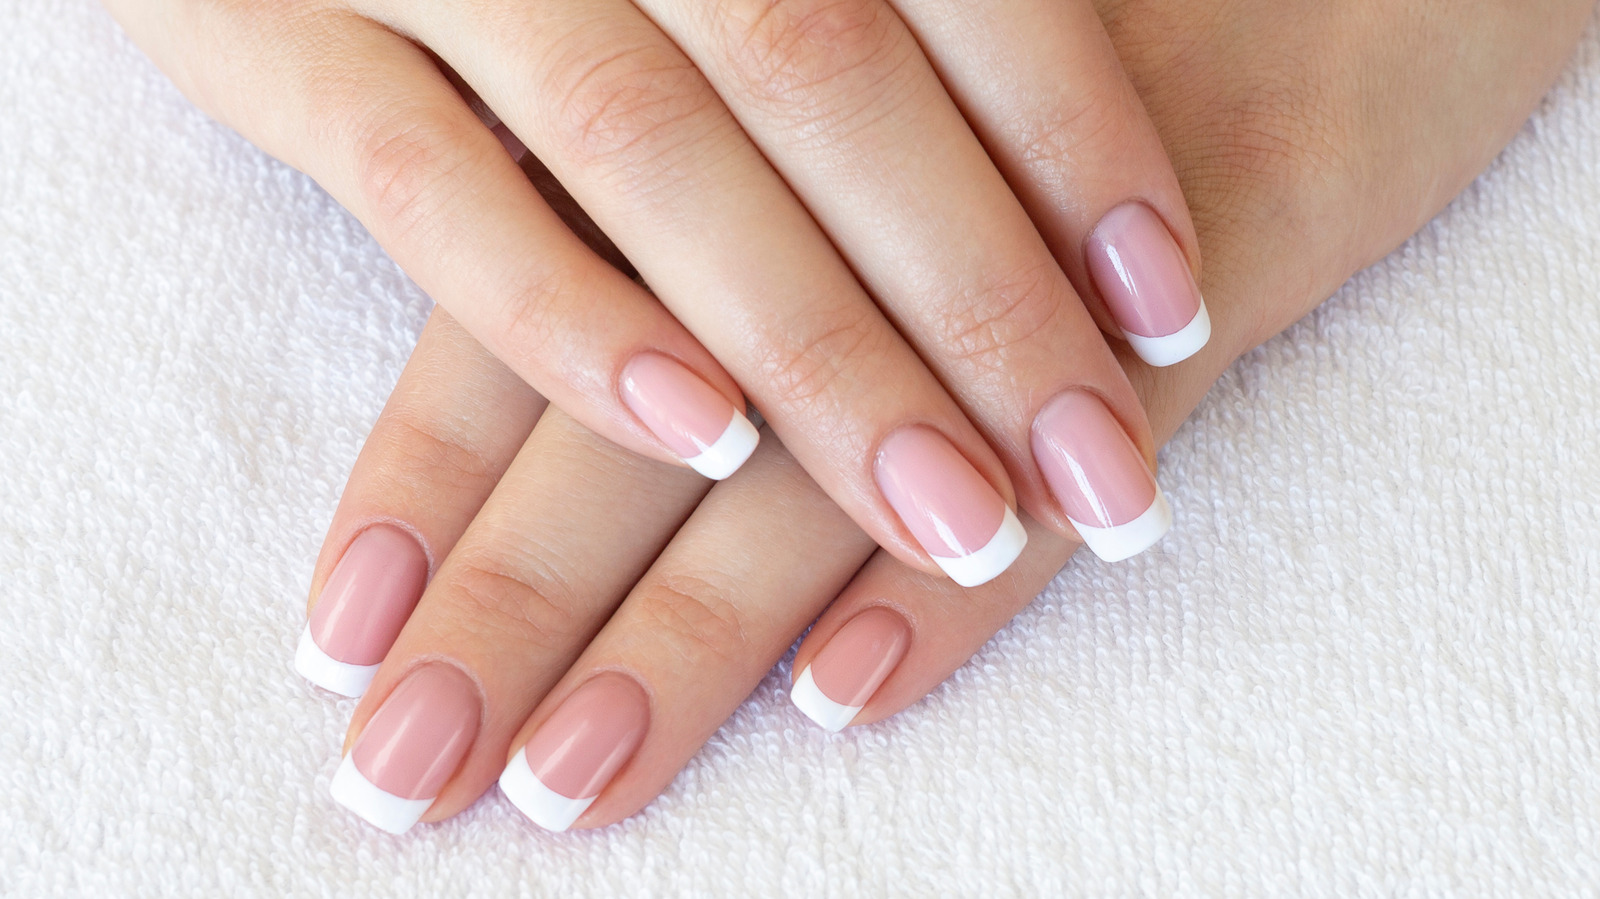 4. "Consider a French manicure for a classic and elongating look on short toenails" - wide 4